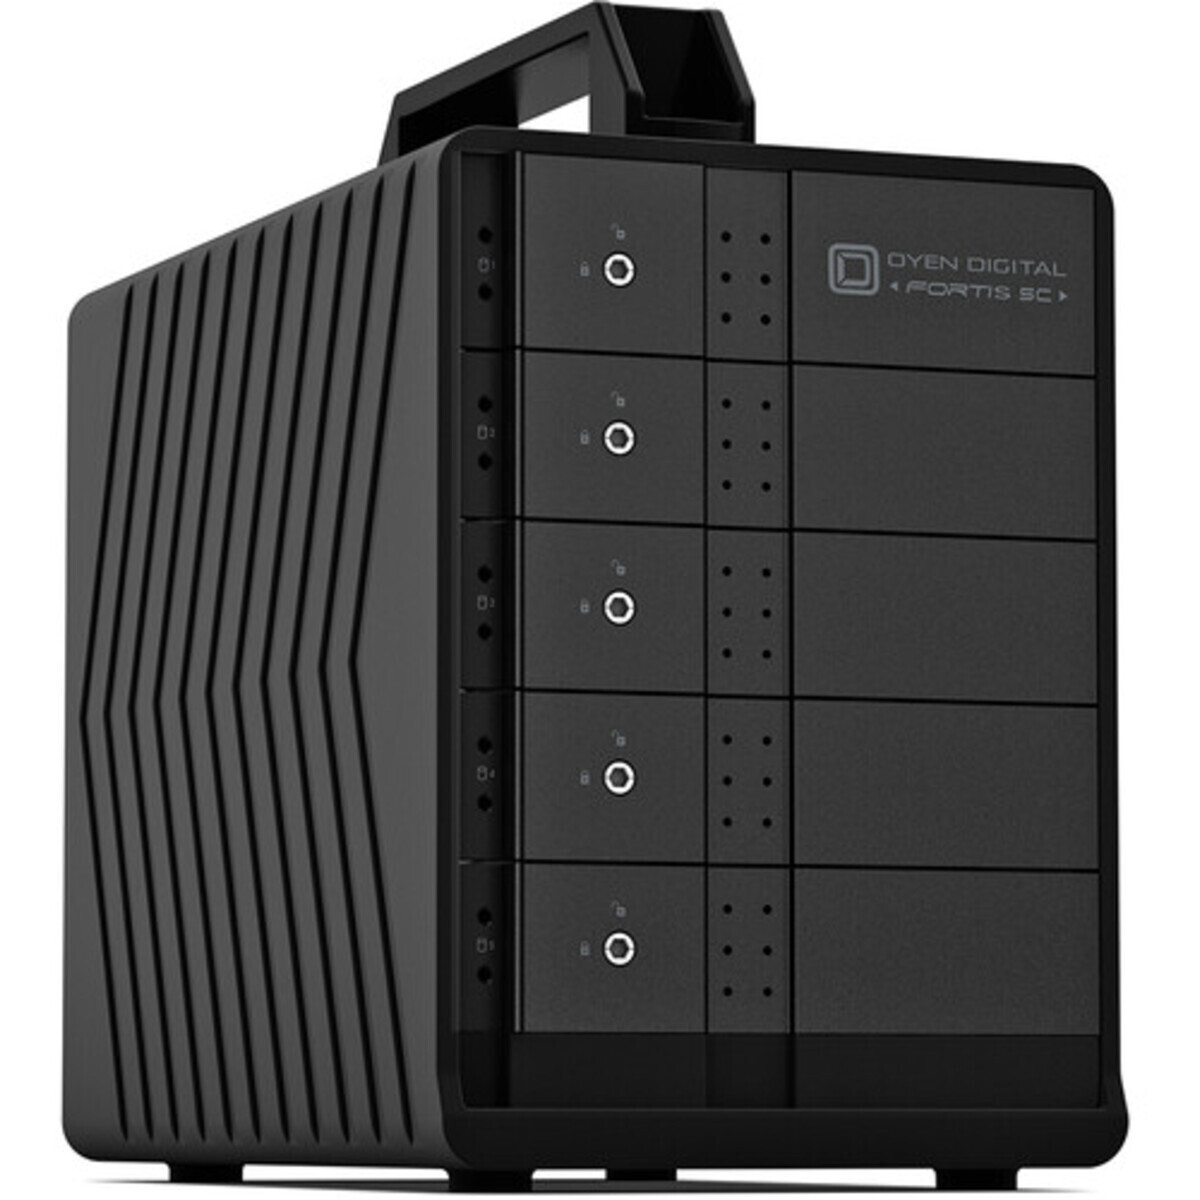 OYEN Fortis 5C 20tb 5-Bay Desktop Multimedia / Power User / Business DAS - Direct Attached Storage Device 5x4tb Crucial MX500 CT4000MX500SSD1 2.5 560/510MB/s SATA 6Gb/s SSD CONSUMER Class Drives Installed - Burn-In Tested Fortis 5C